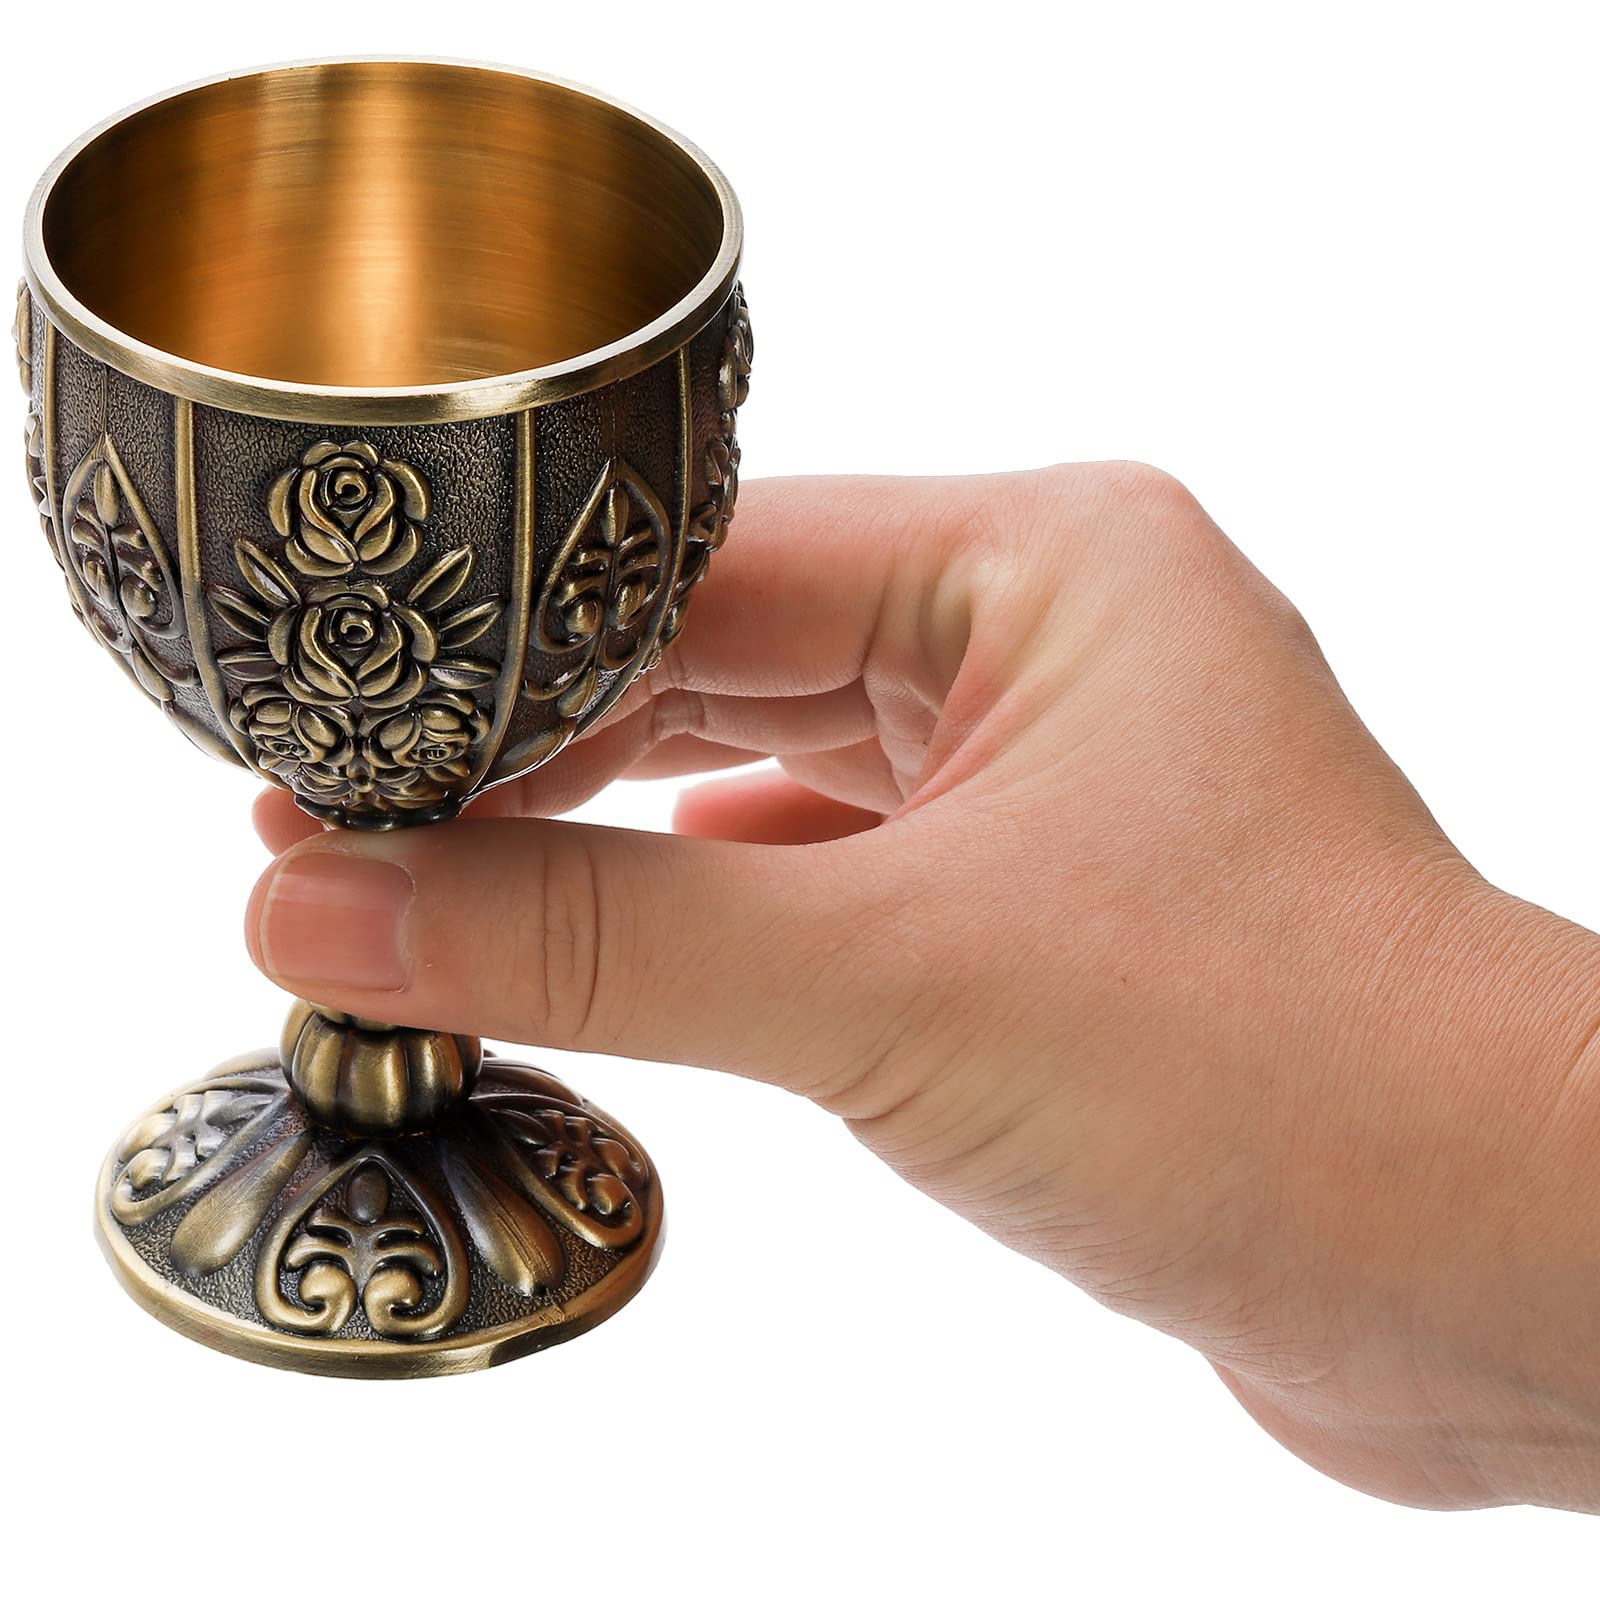 Yopay Handmade Goblet Chalice, Vintage Engraving Wine Liqueur Cup, 3.4OZ Food Safe Sturdy Drinking Vessel Shot Glasses for Buddha Weddings Home Decor Blessings